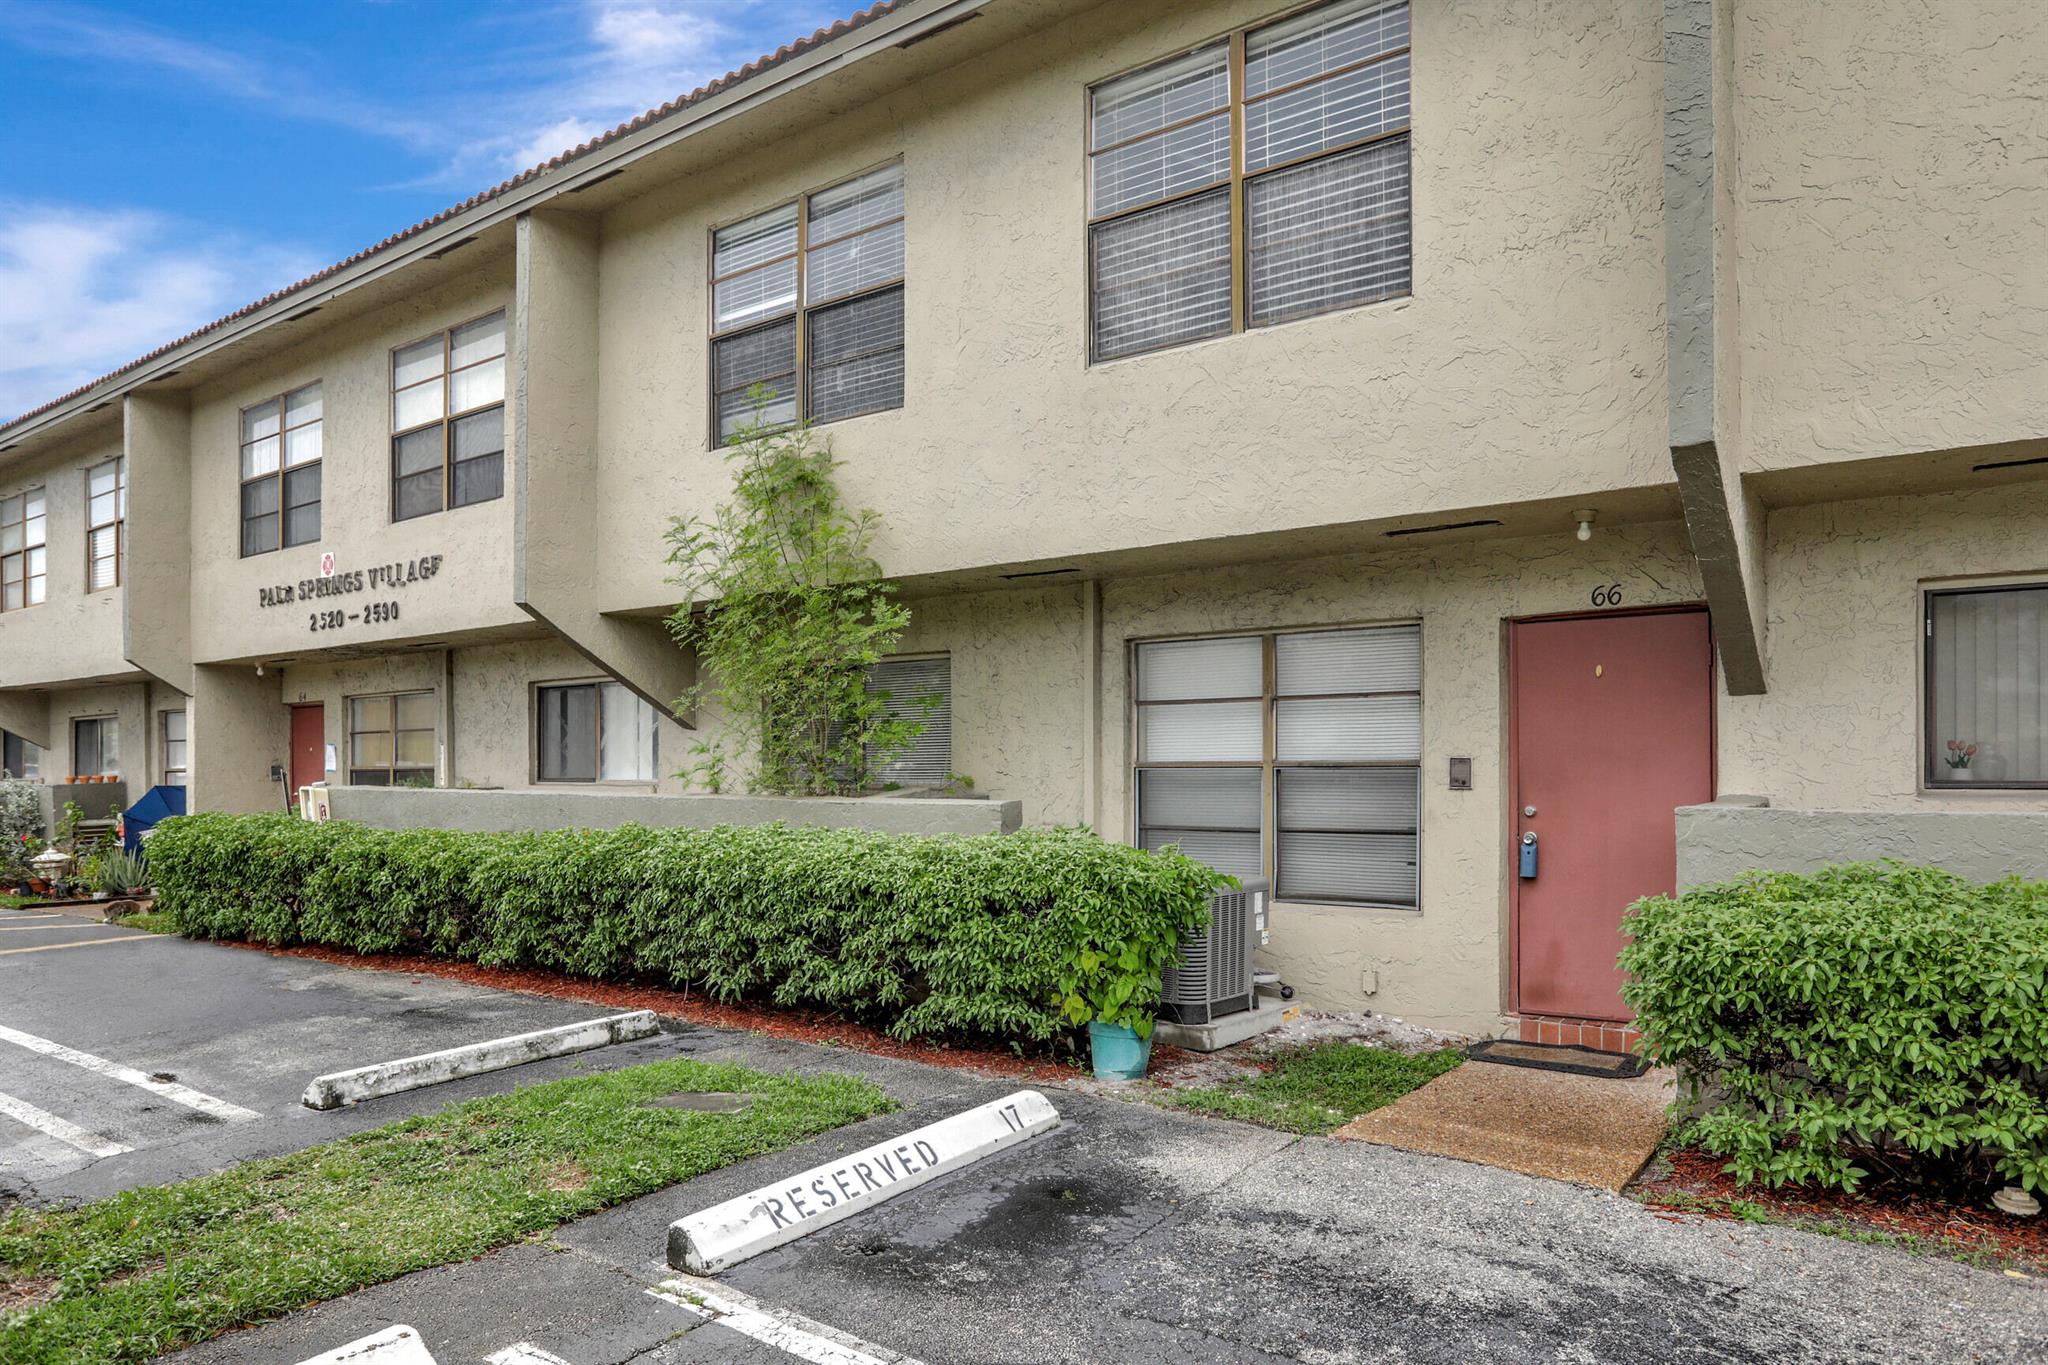 3 bedroom, 2.5 bath townhouse in a great location in Coral Springs, right next to big parks, shopping and restaurants. Washer and dryer in the unit.